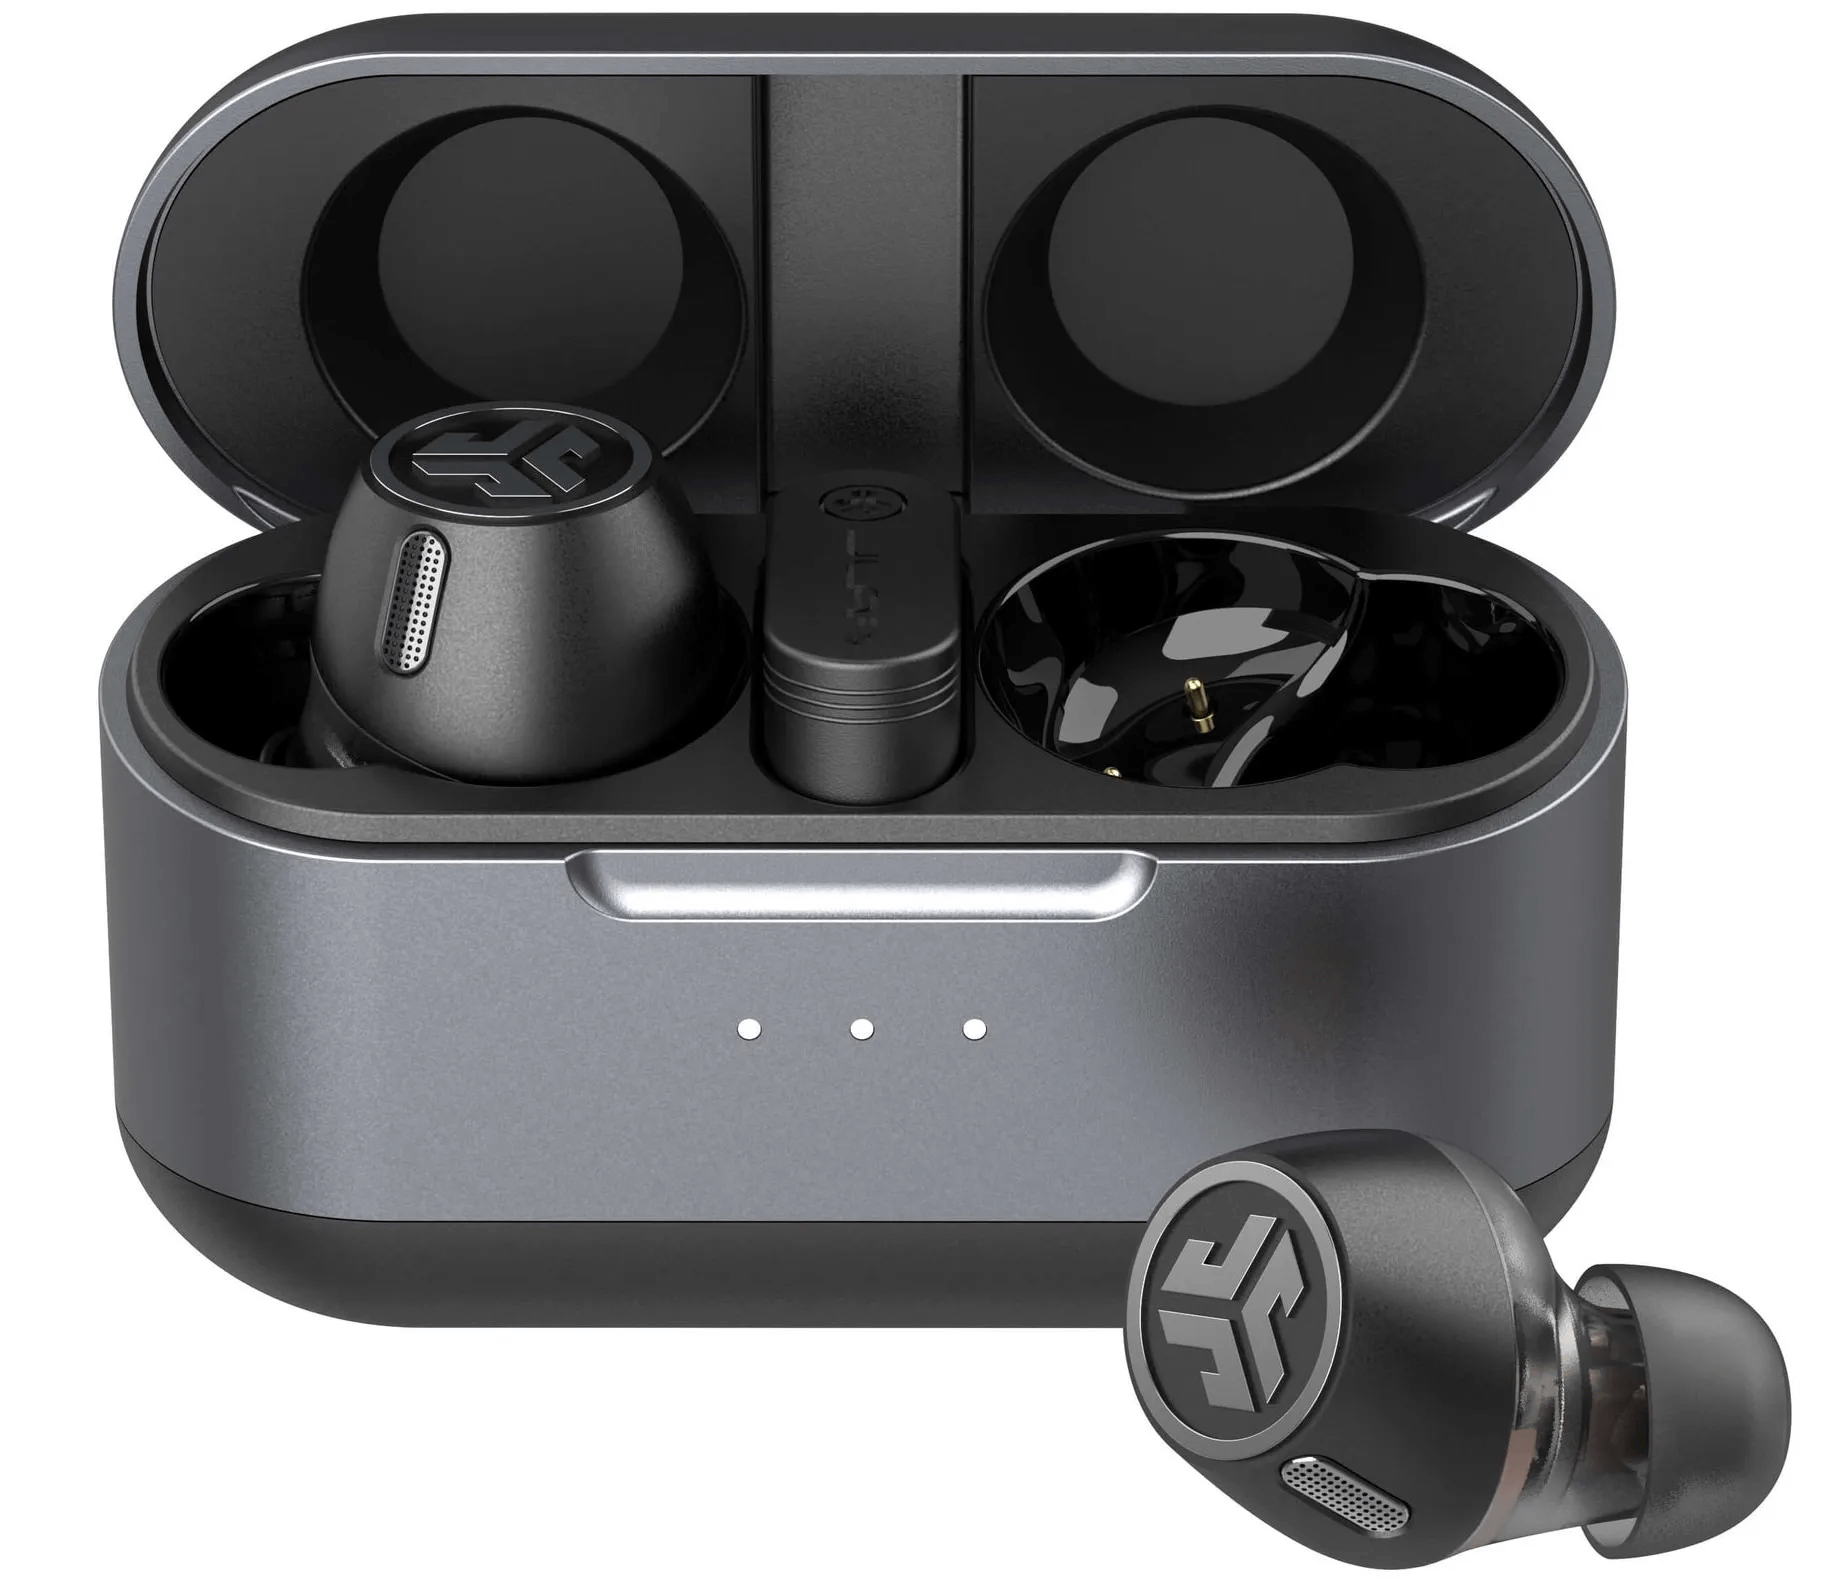 JLab Epic Lab Edition Earbuds in black silver color.